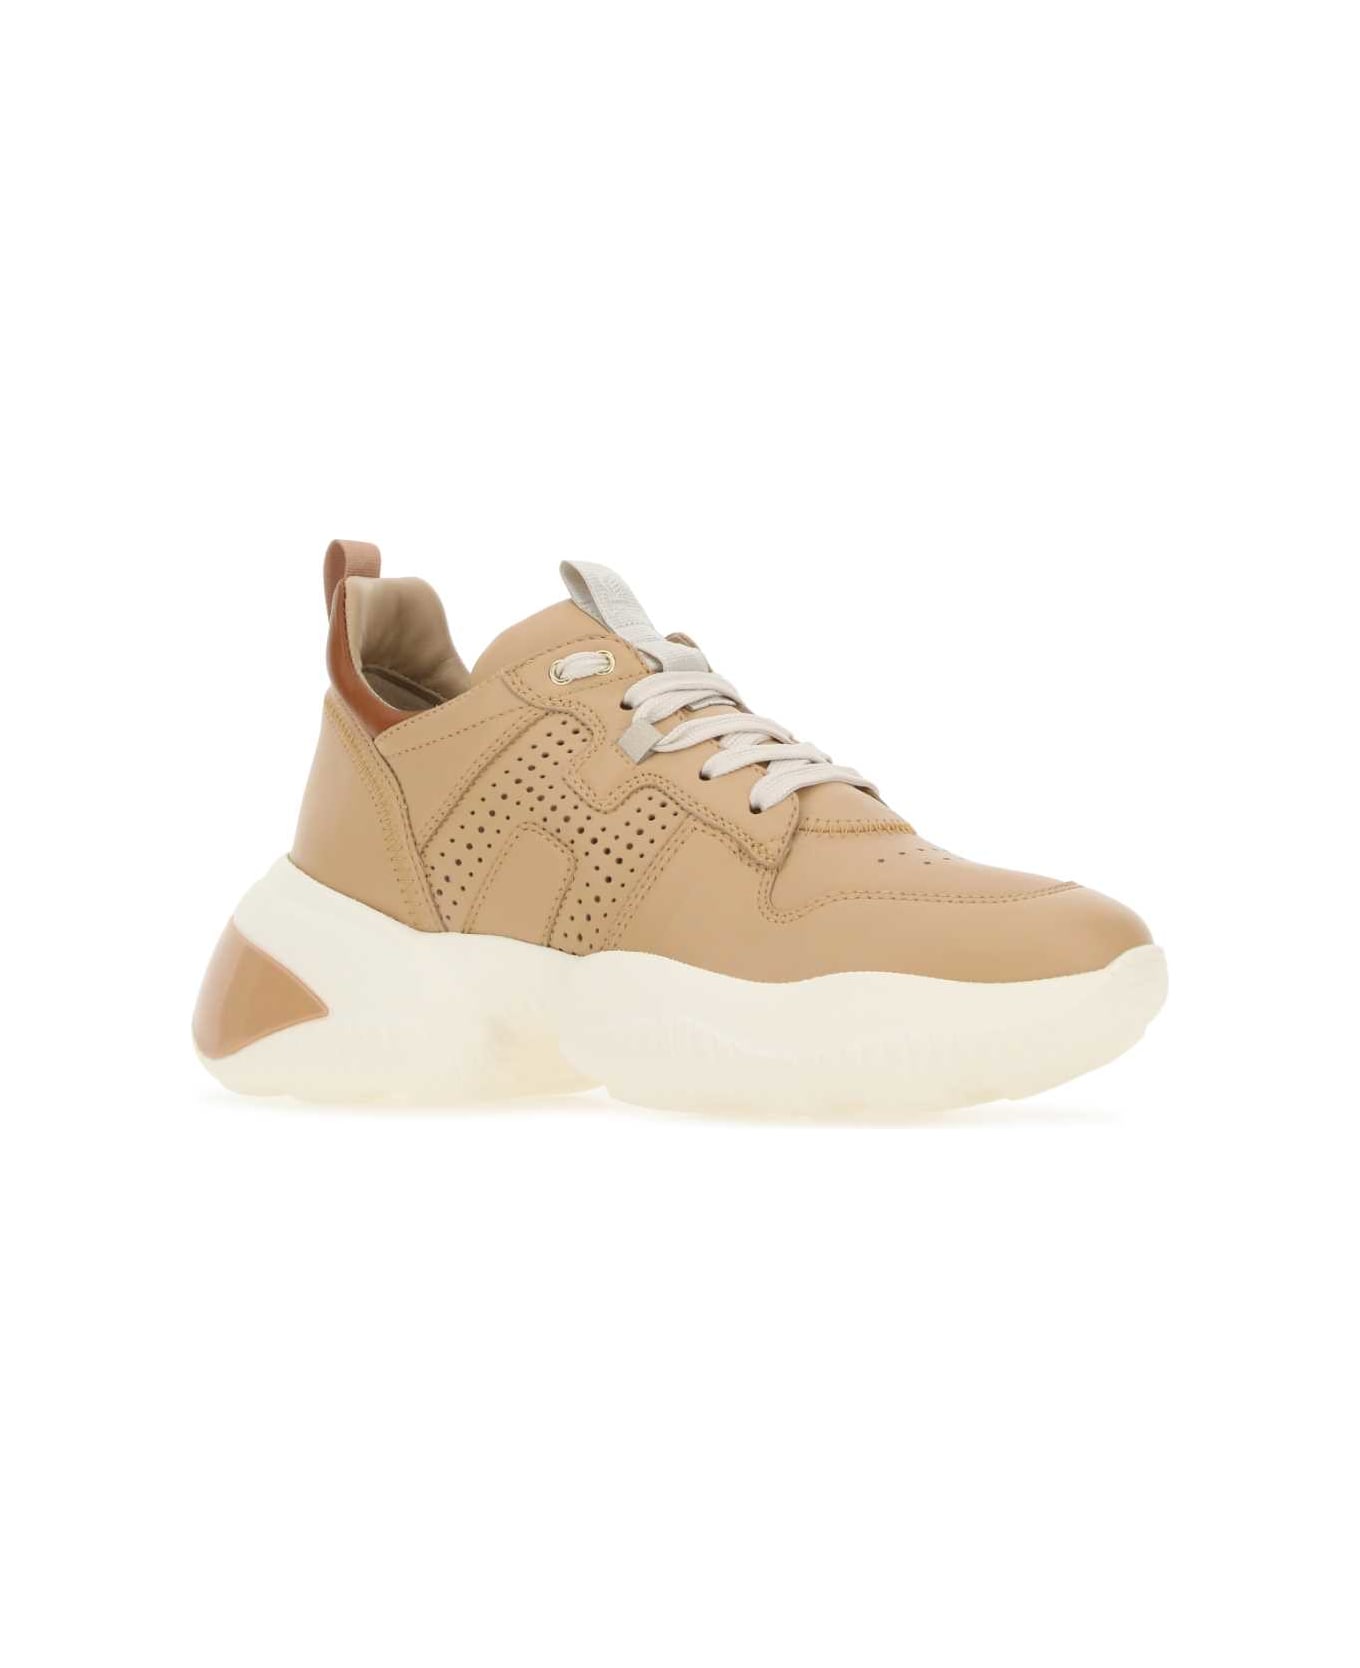 Hogan Camel Leather Interaction Sneakers - 078Z